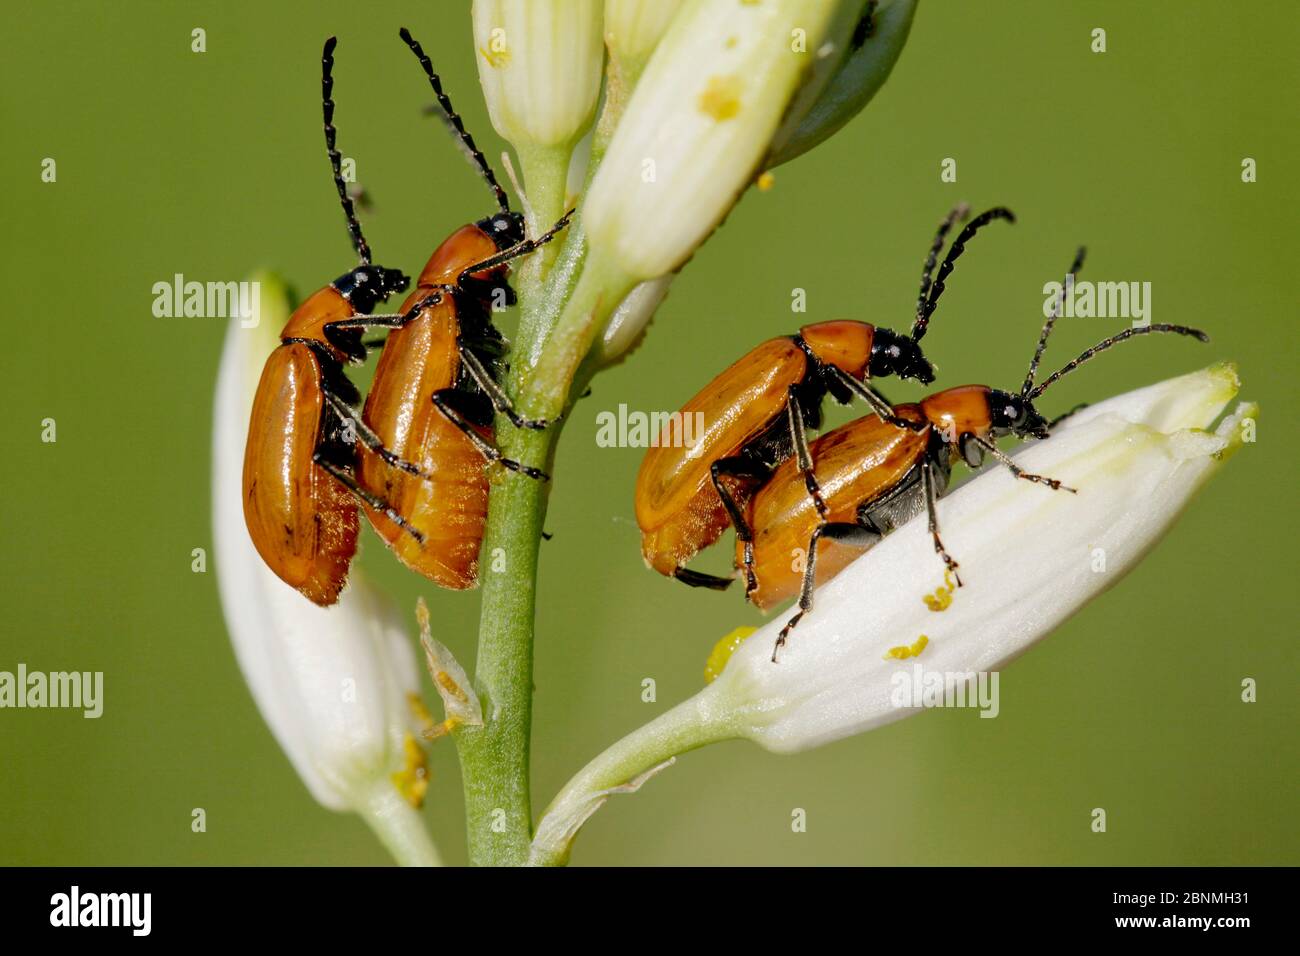 Beetles (Exosoma lusitanicum) two pairs mating, Plaine des Maures National Natural Reserve, France, April. Stock Photo